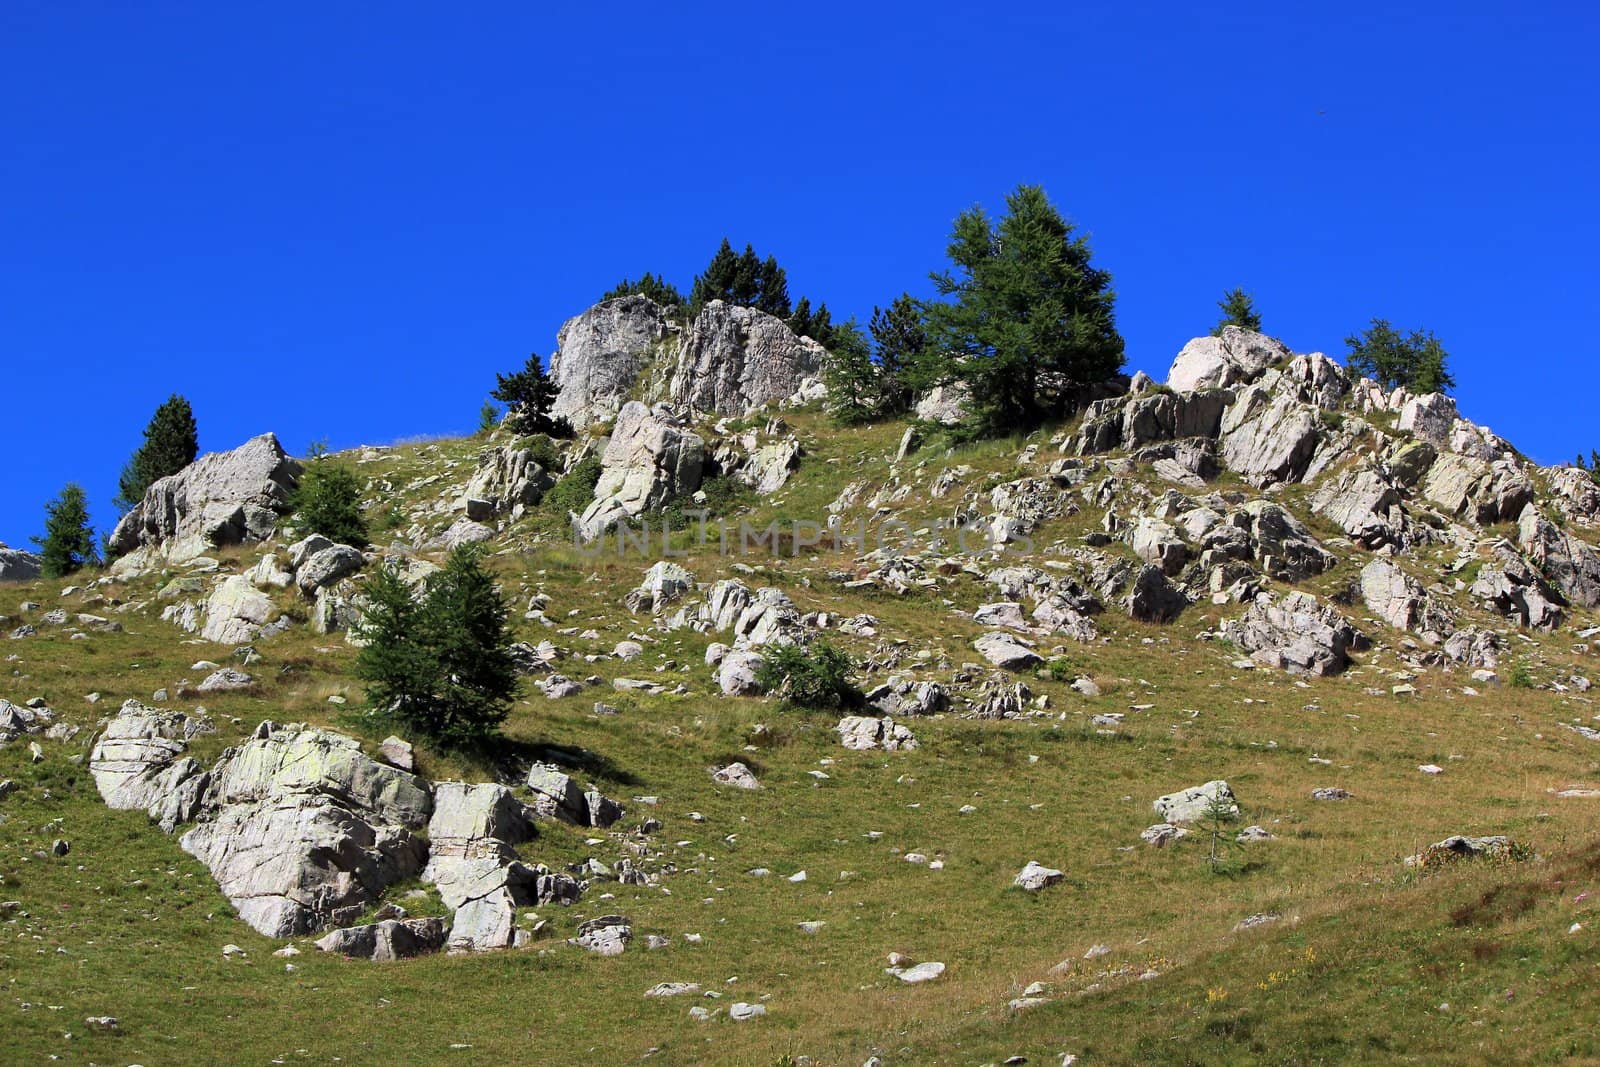 Trees, rocks and green grass by beautiful weather at the Cayolle pass, France